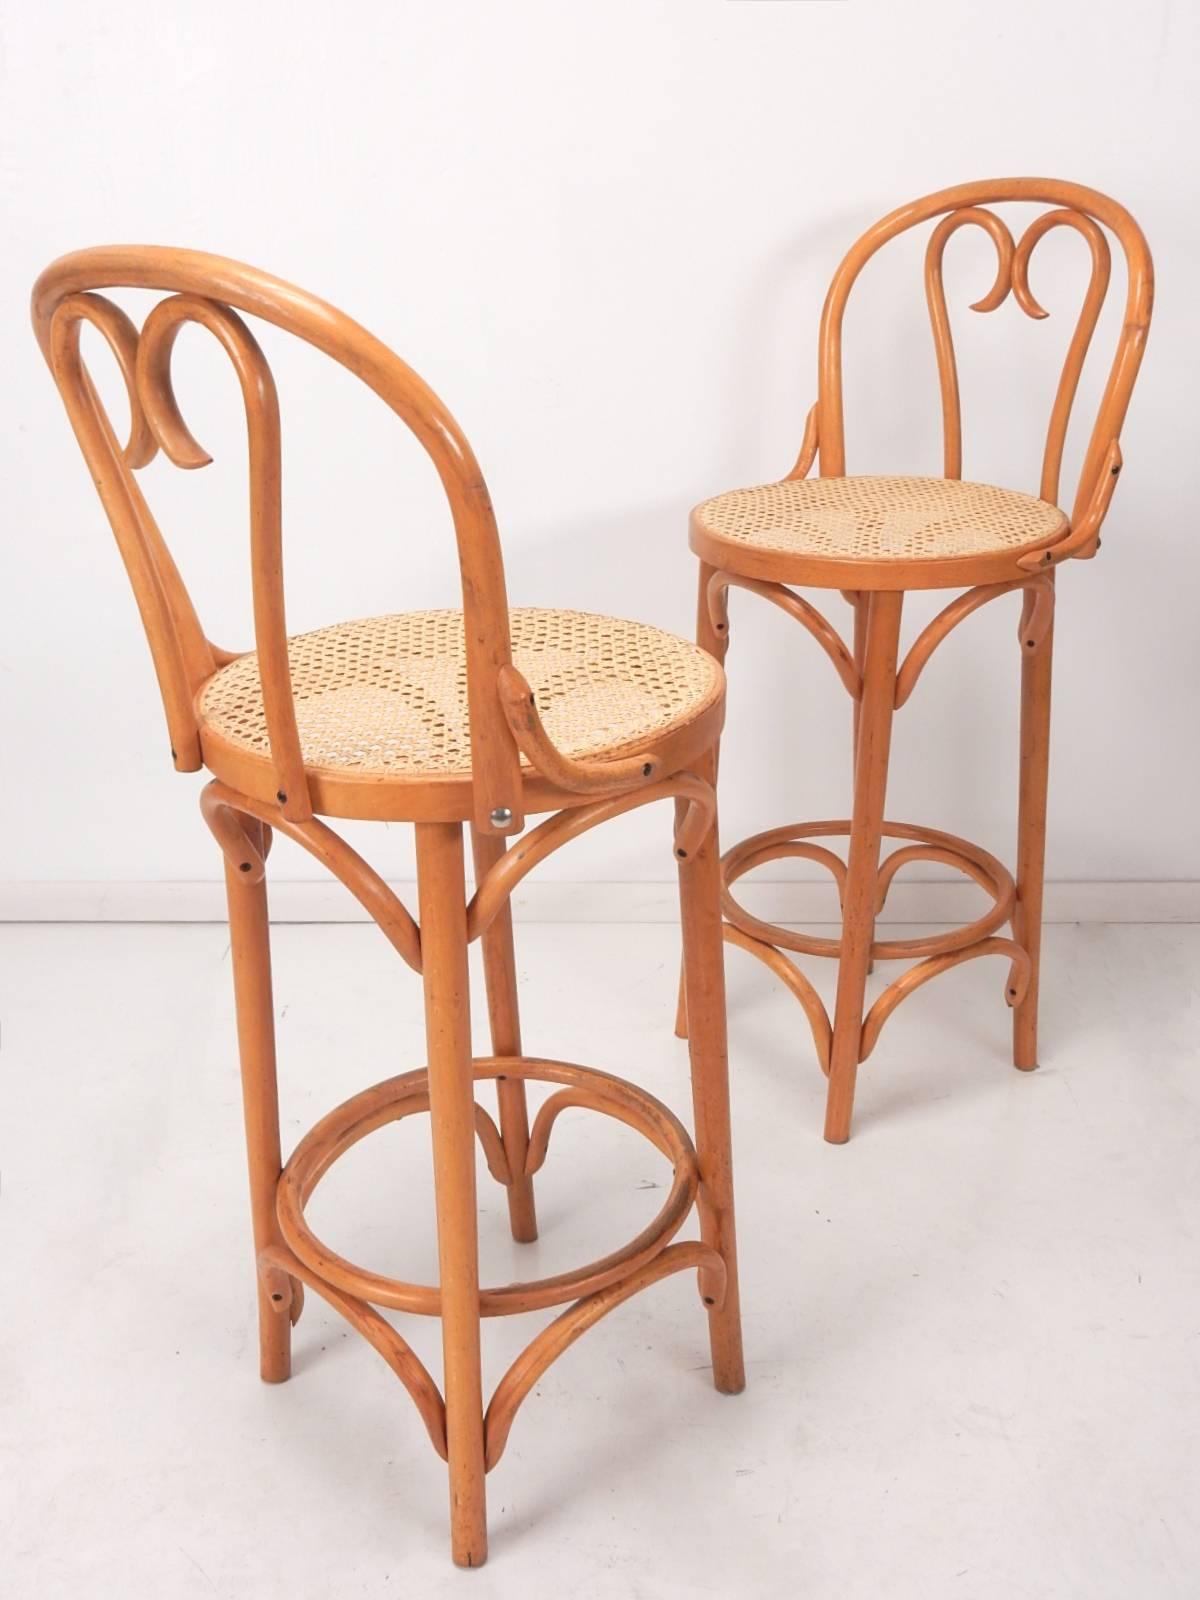 Set of four mid-20th century Thonet style bentwood cane bar stools with back rests.
Tall, counter height stools with footrest. 
All four are in very good condition, solid with no issues.
Cane seating is solid, free of holes or tears.
Nice golden